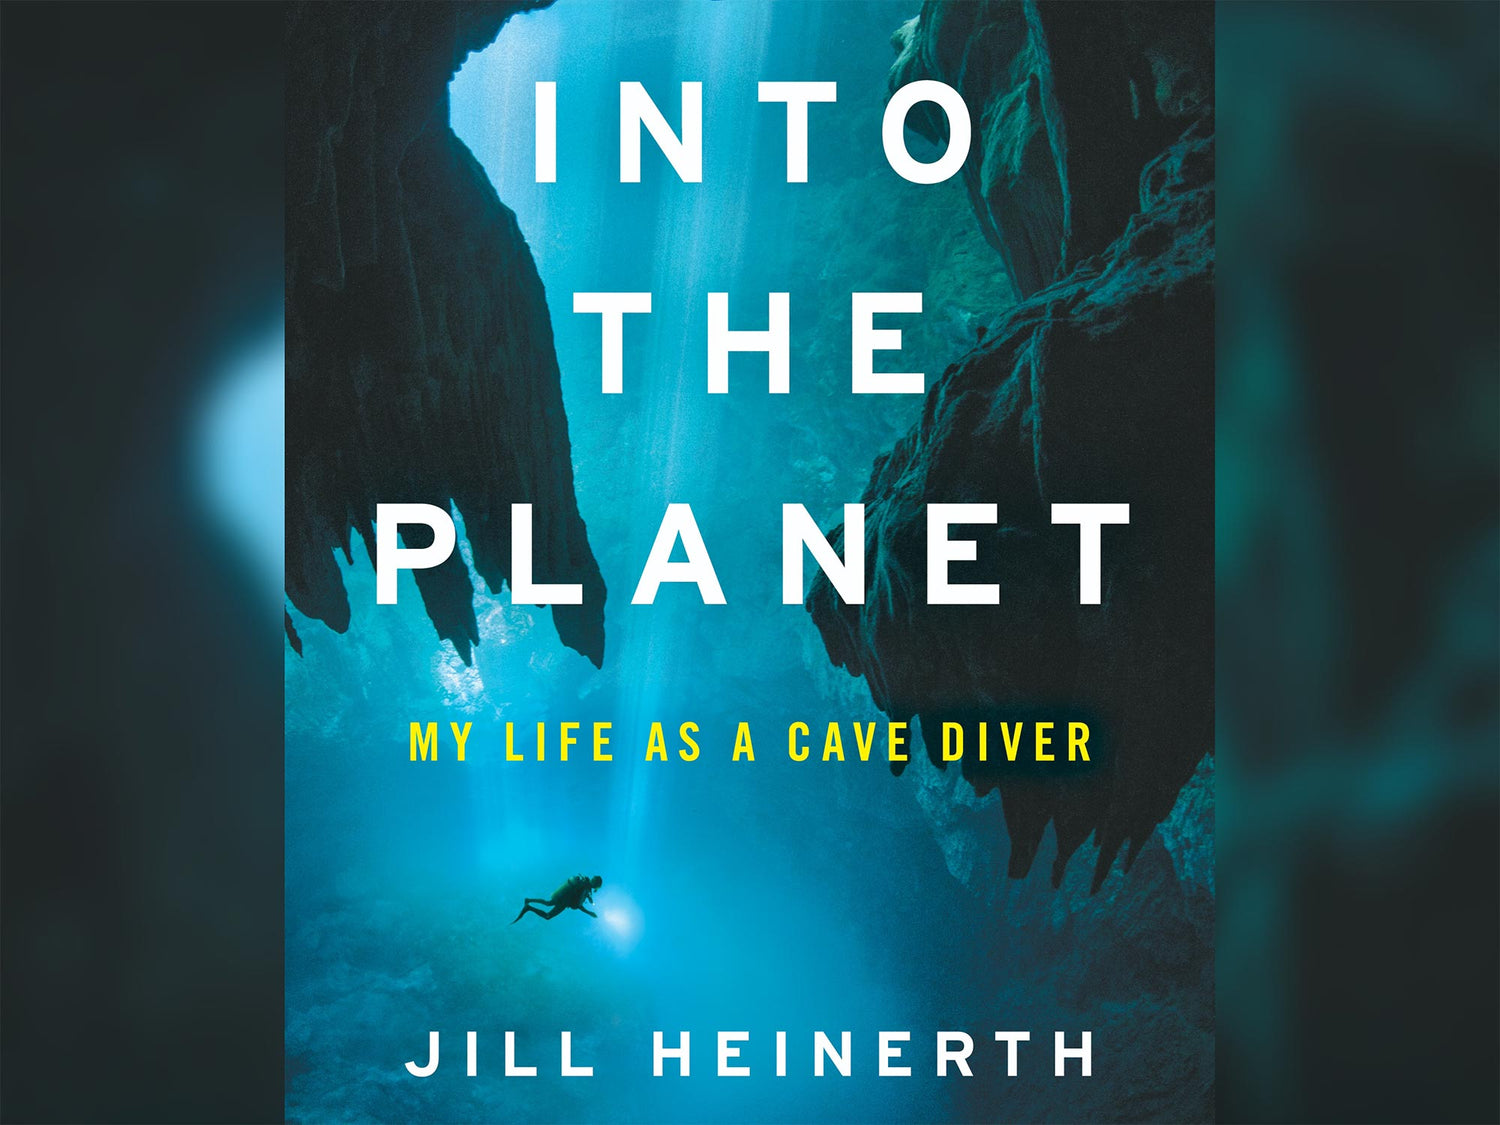 Book Review: Into the Planet by Jill Heinerth